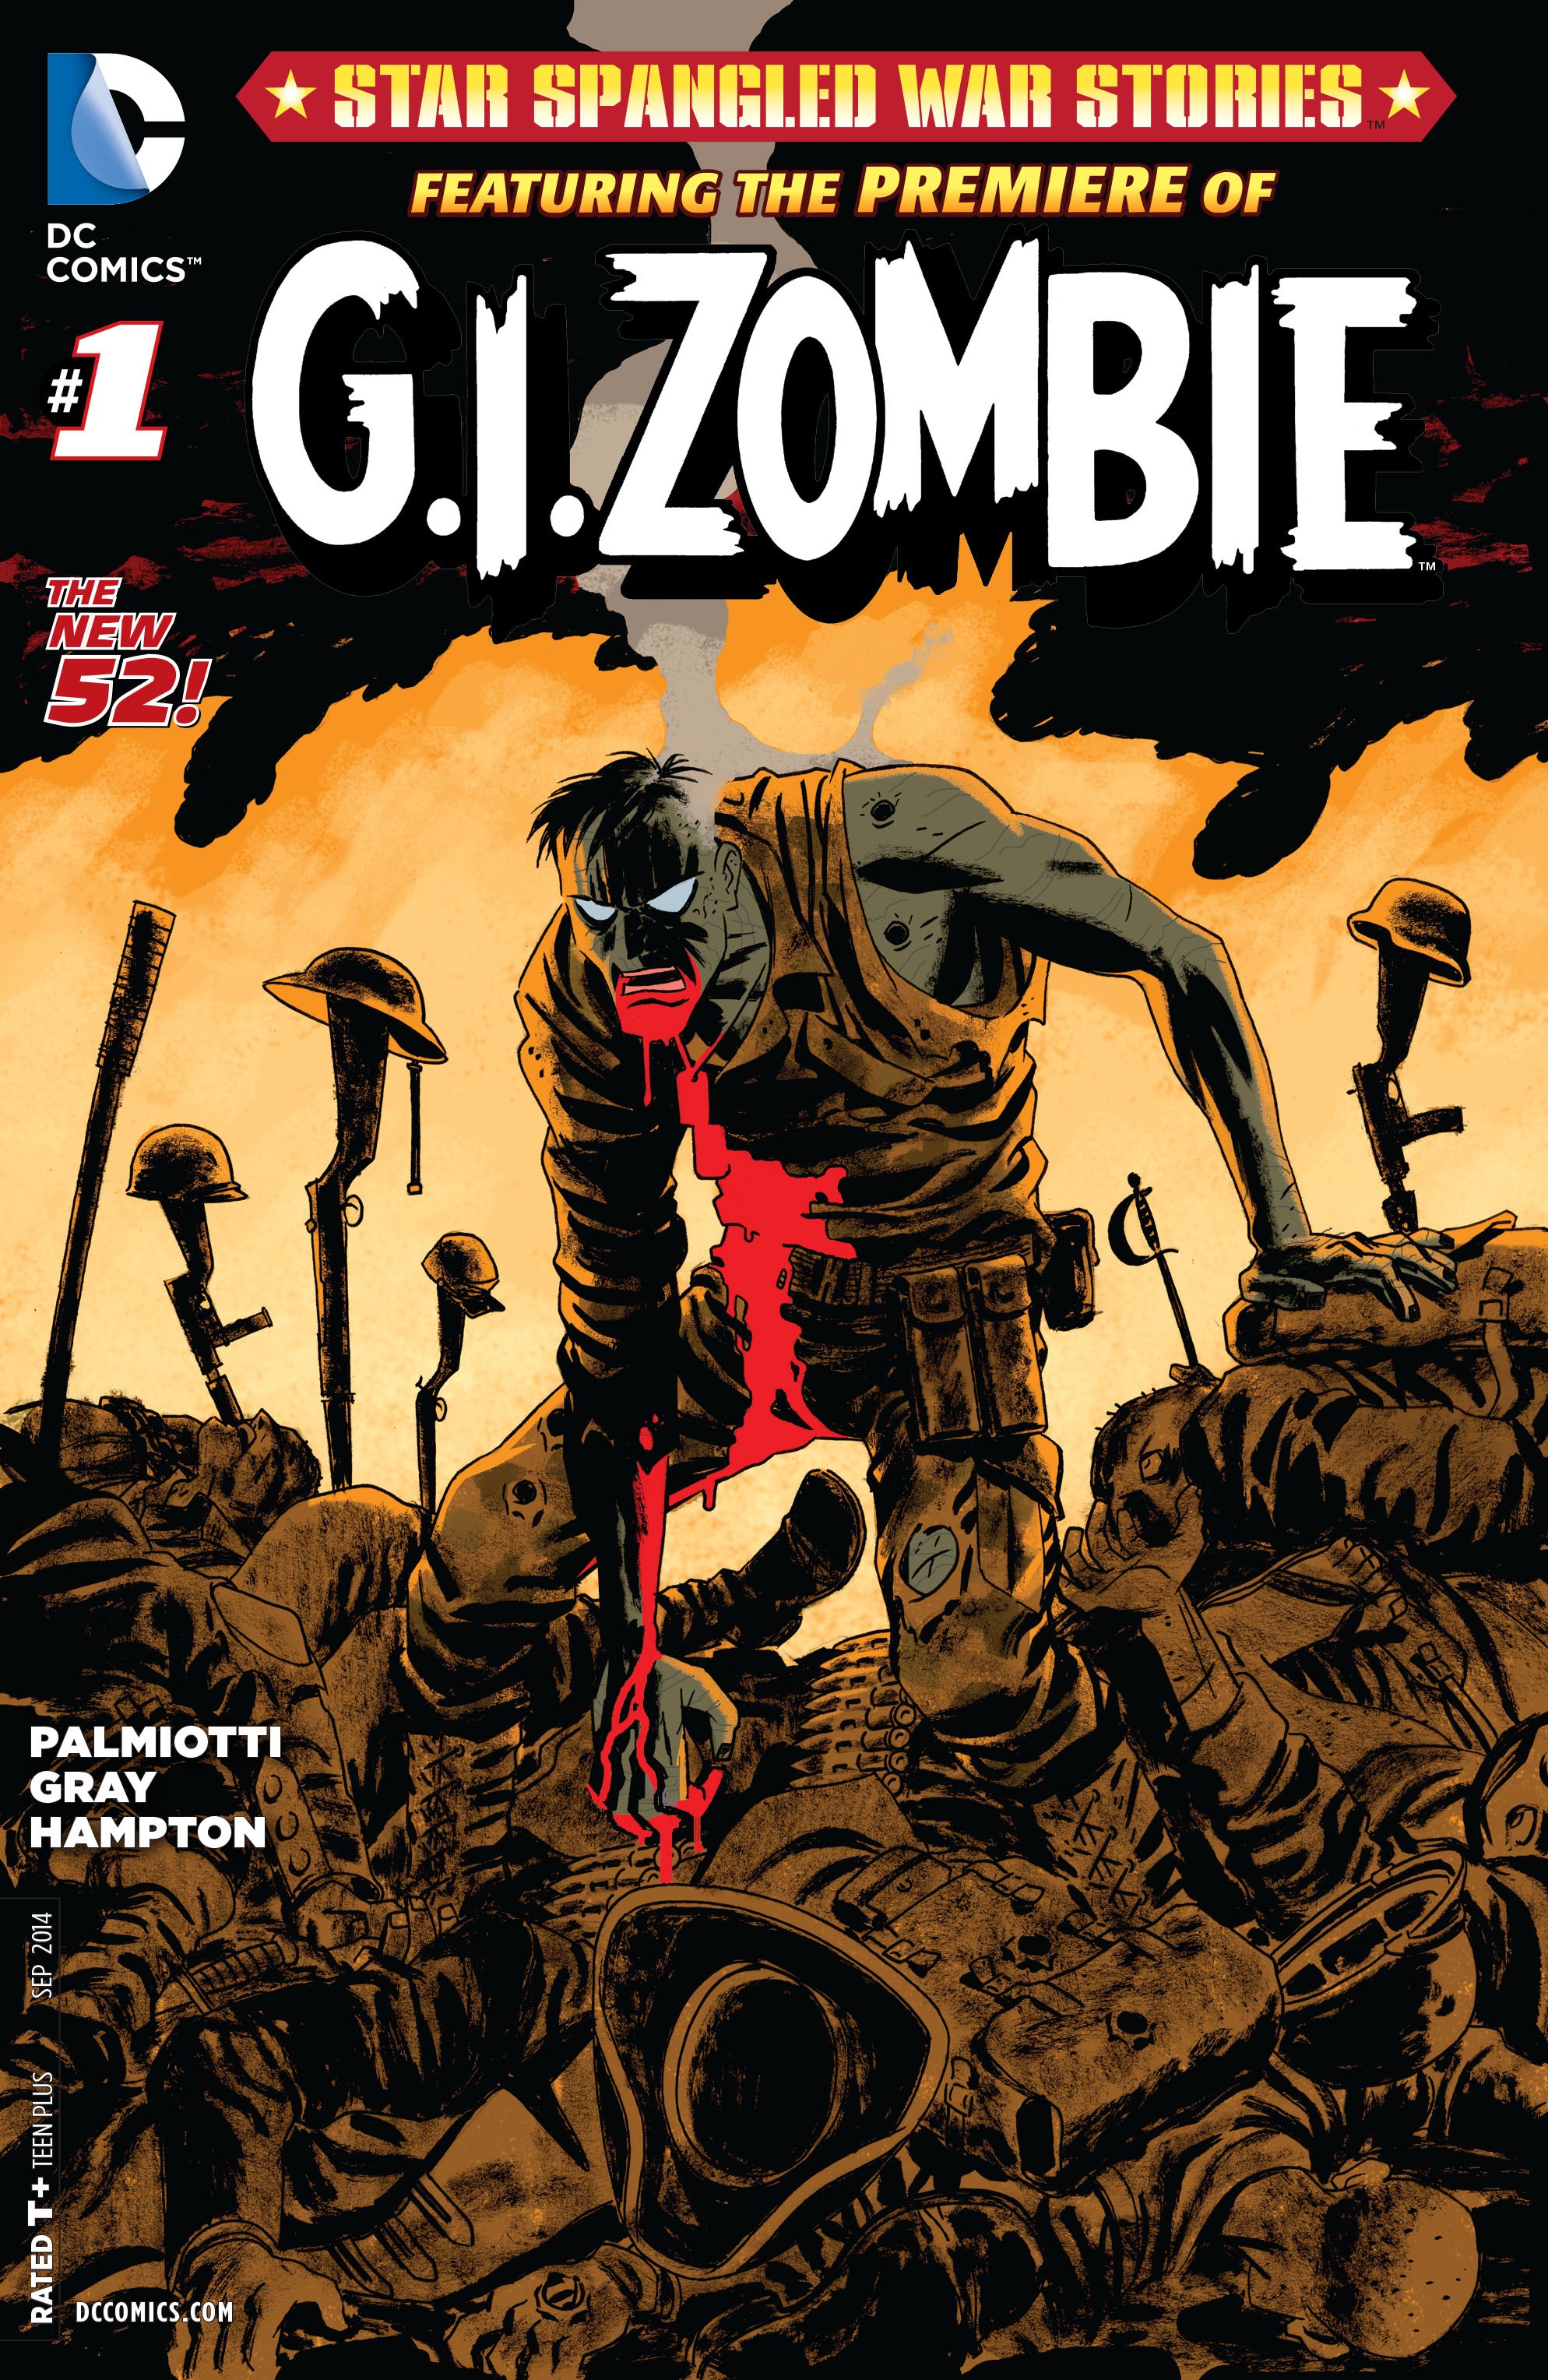 Star-Spangled War Stories Featuring G.I. Zombie Vol. 1 #1